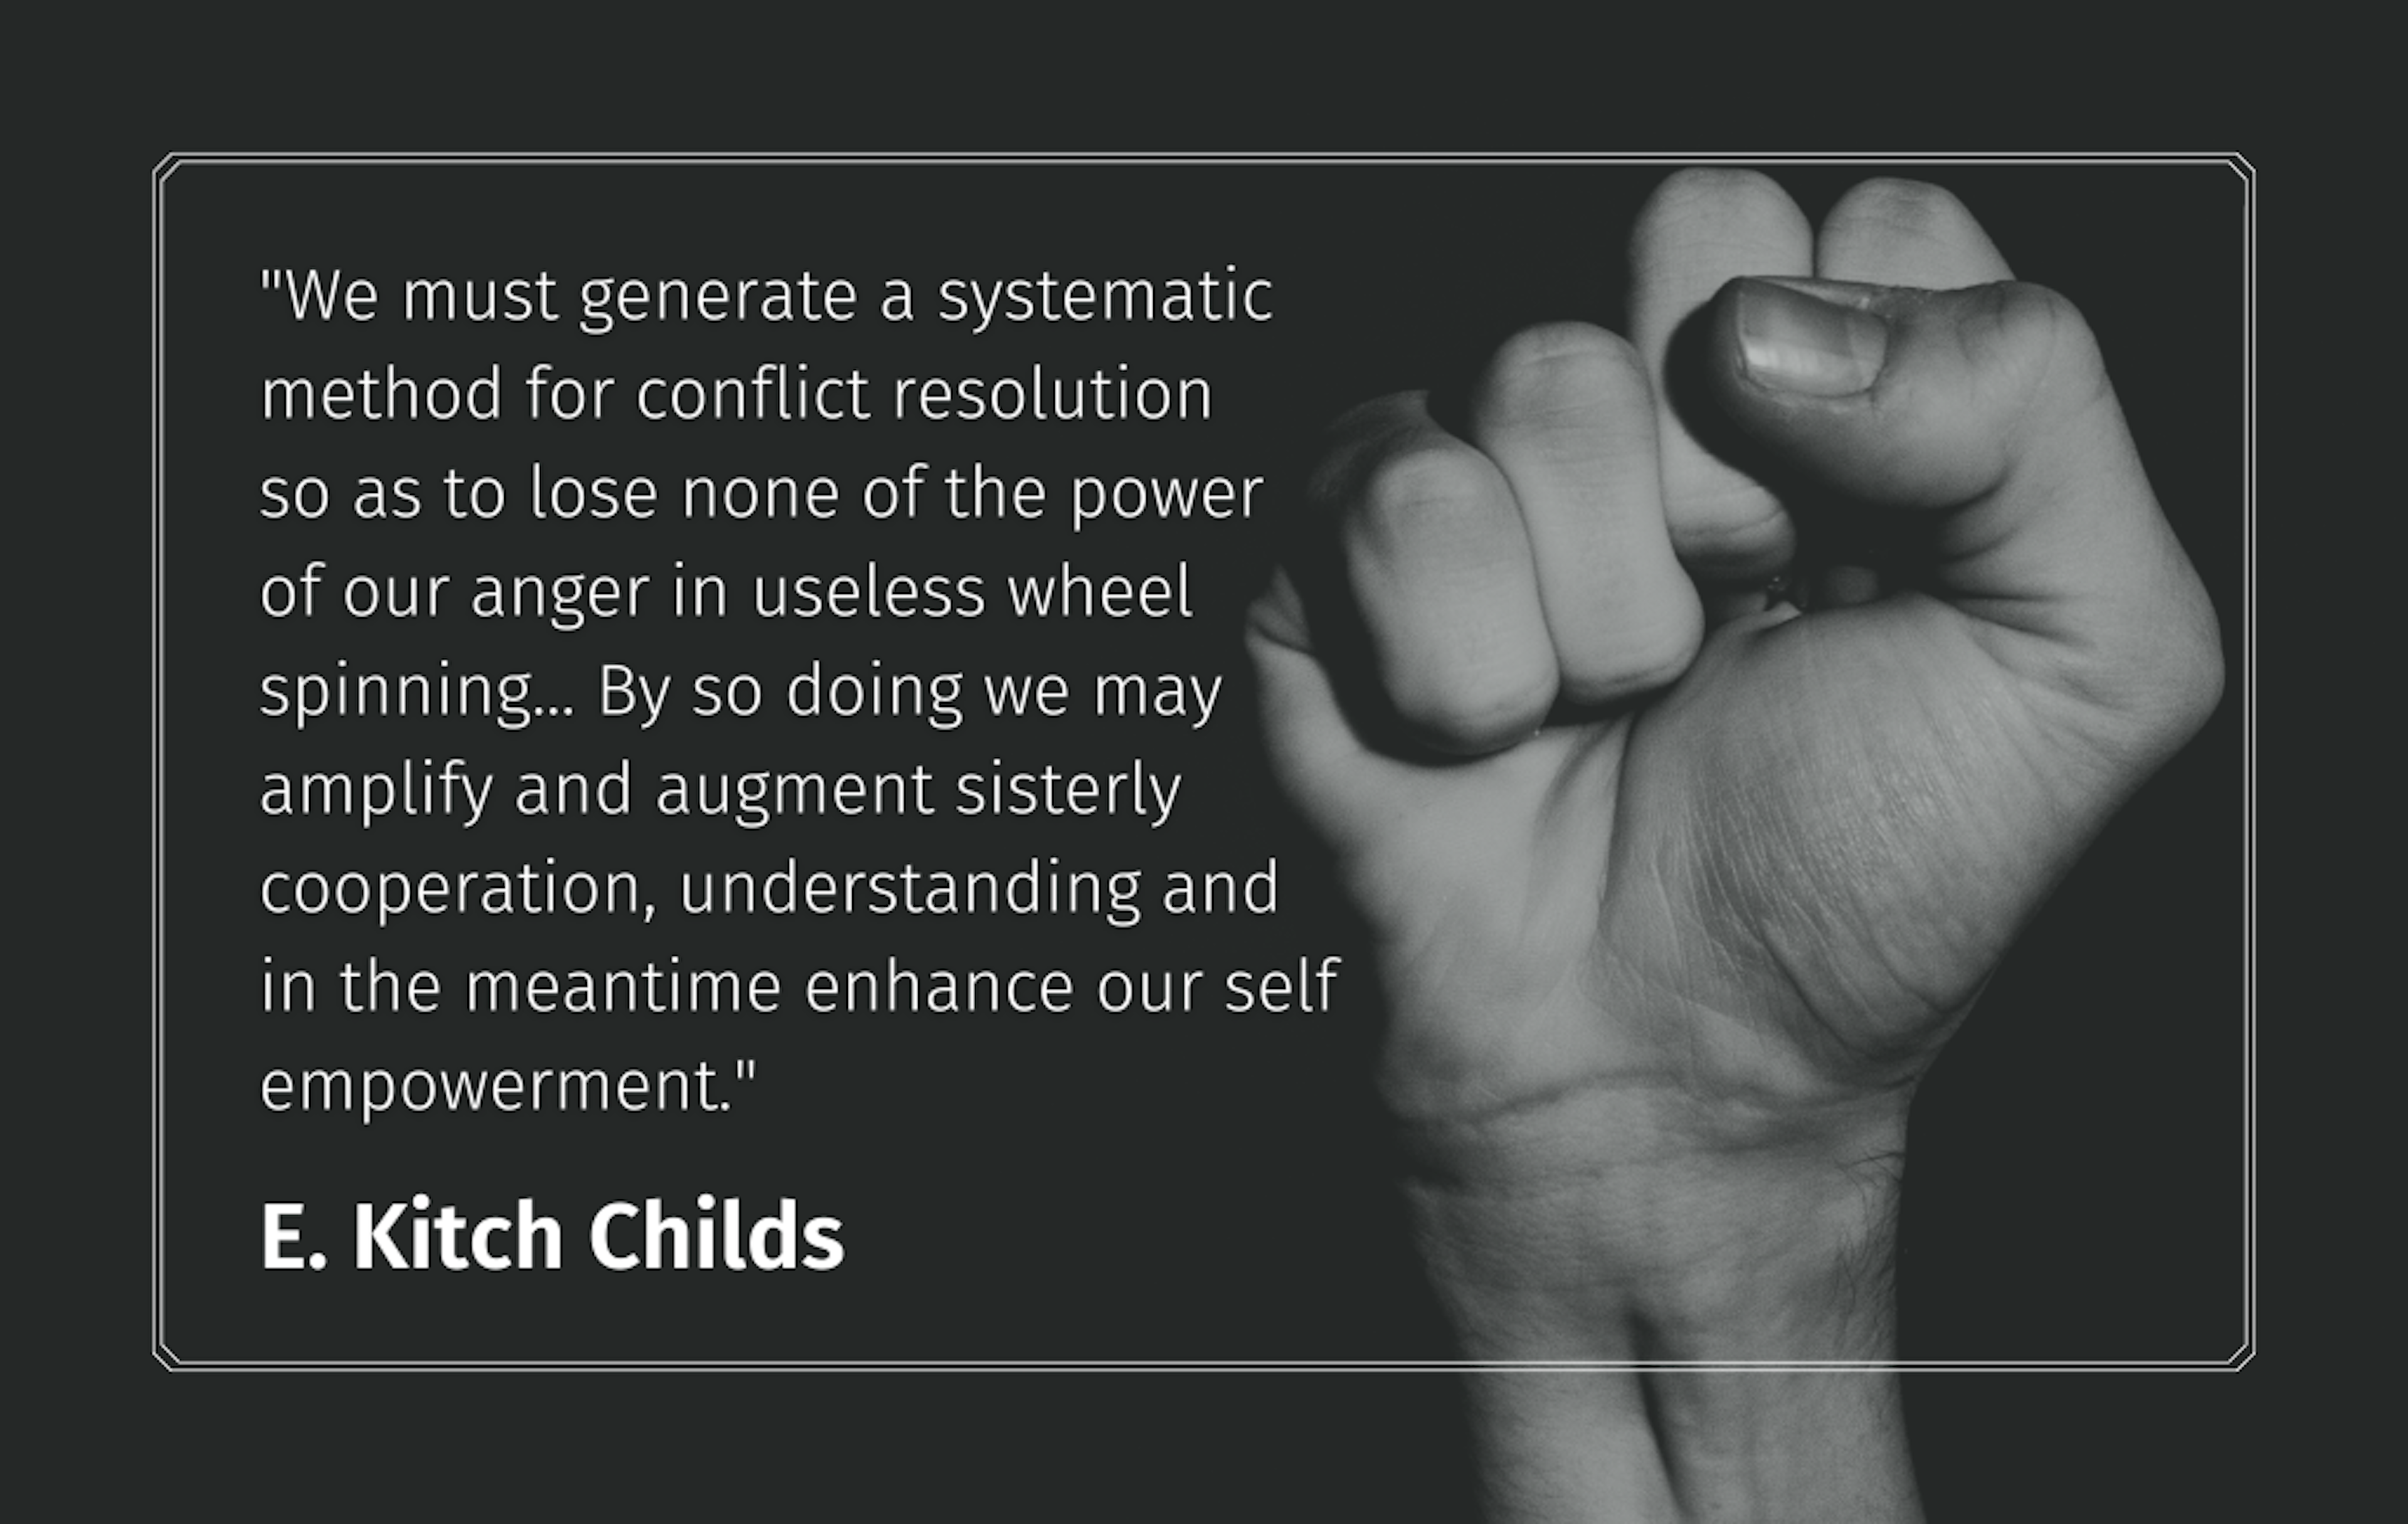 Quote: "We must generate a systemic method for conflict resolution so as to lose none of the power of our anger in useless wheel spinning..." E. Kitch Childs